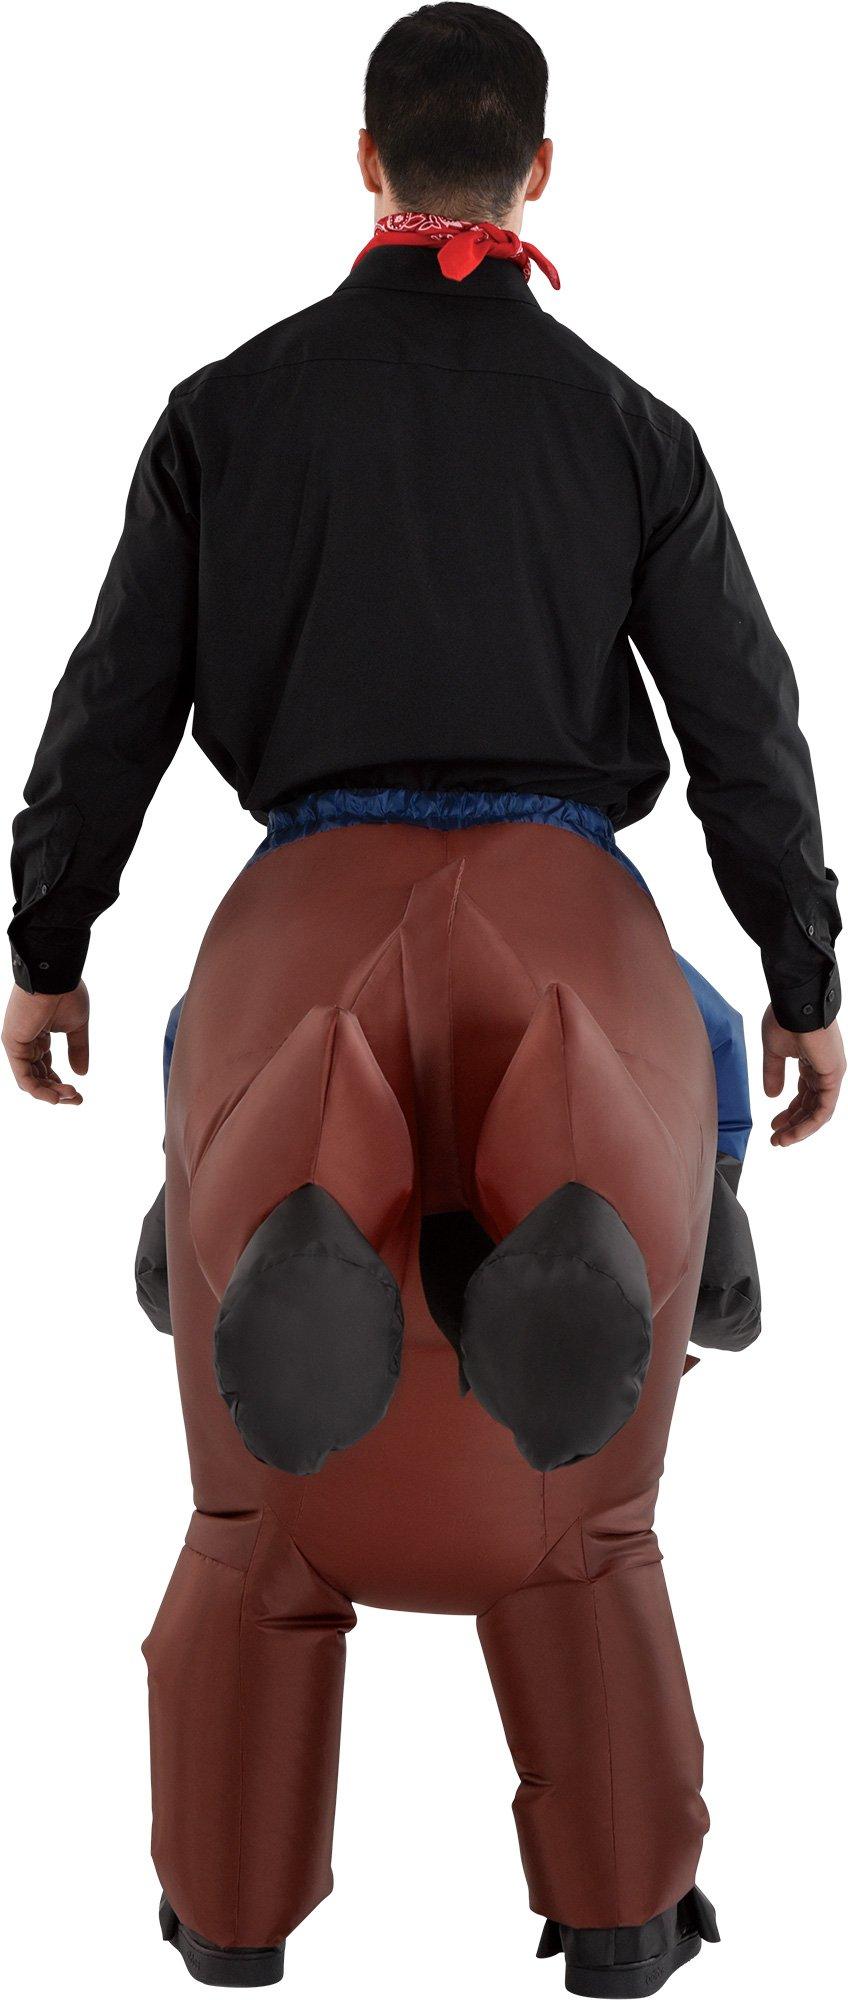 Adult Inflatable Bull Rider Costume